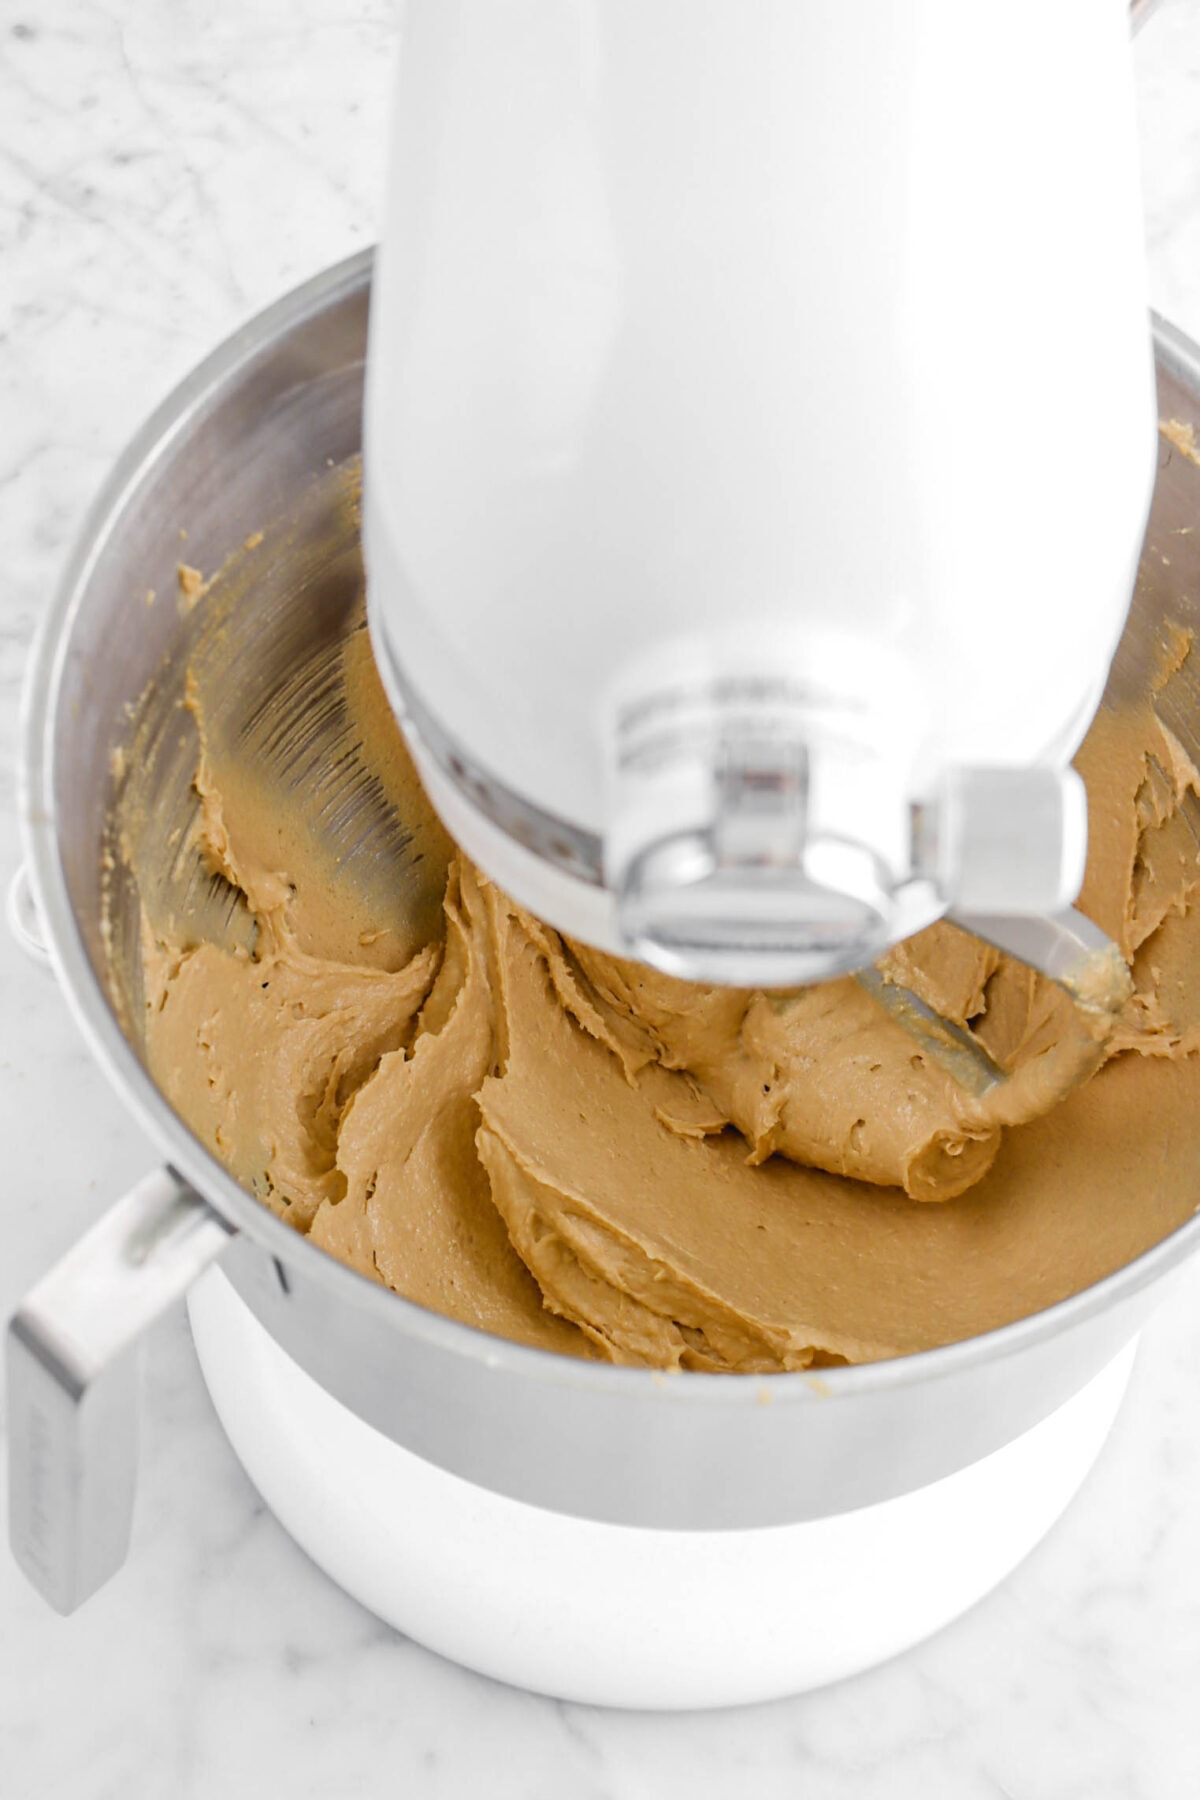 eggs and vanilla mixed into peanut butter mixture in stand mixer.